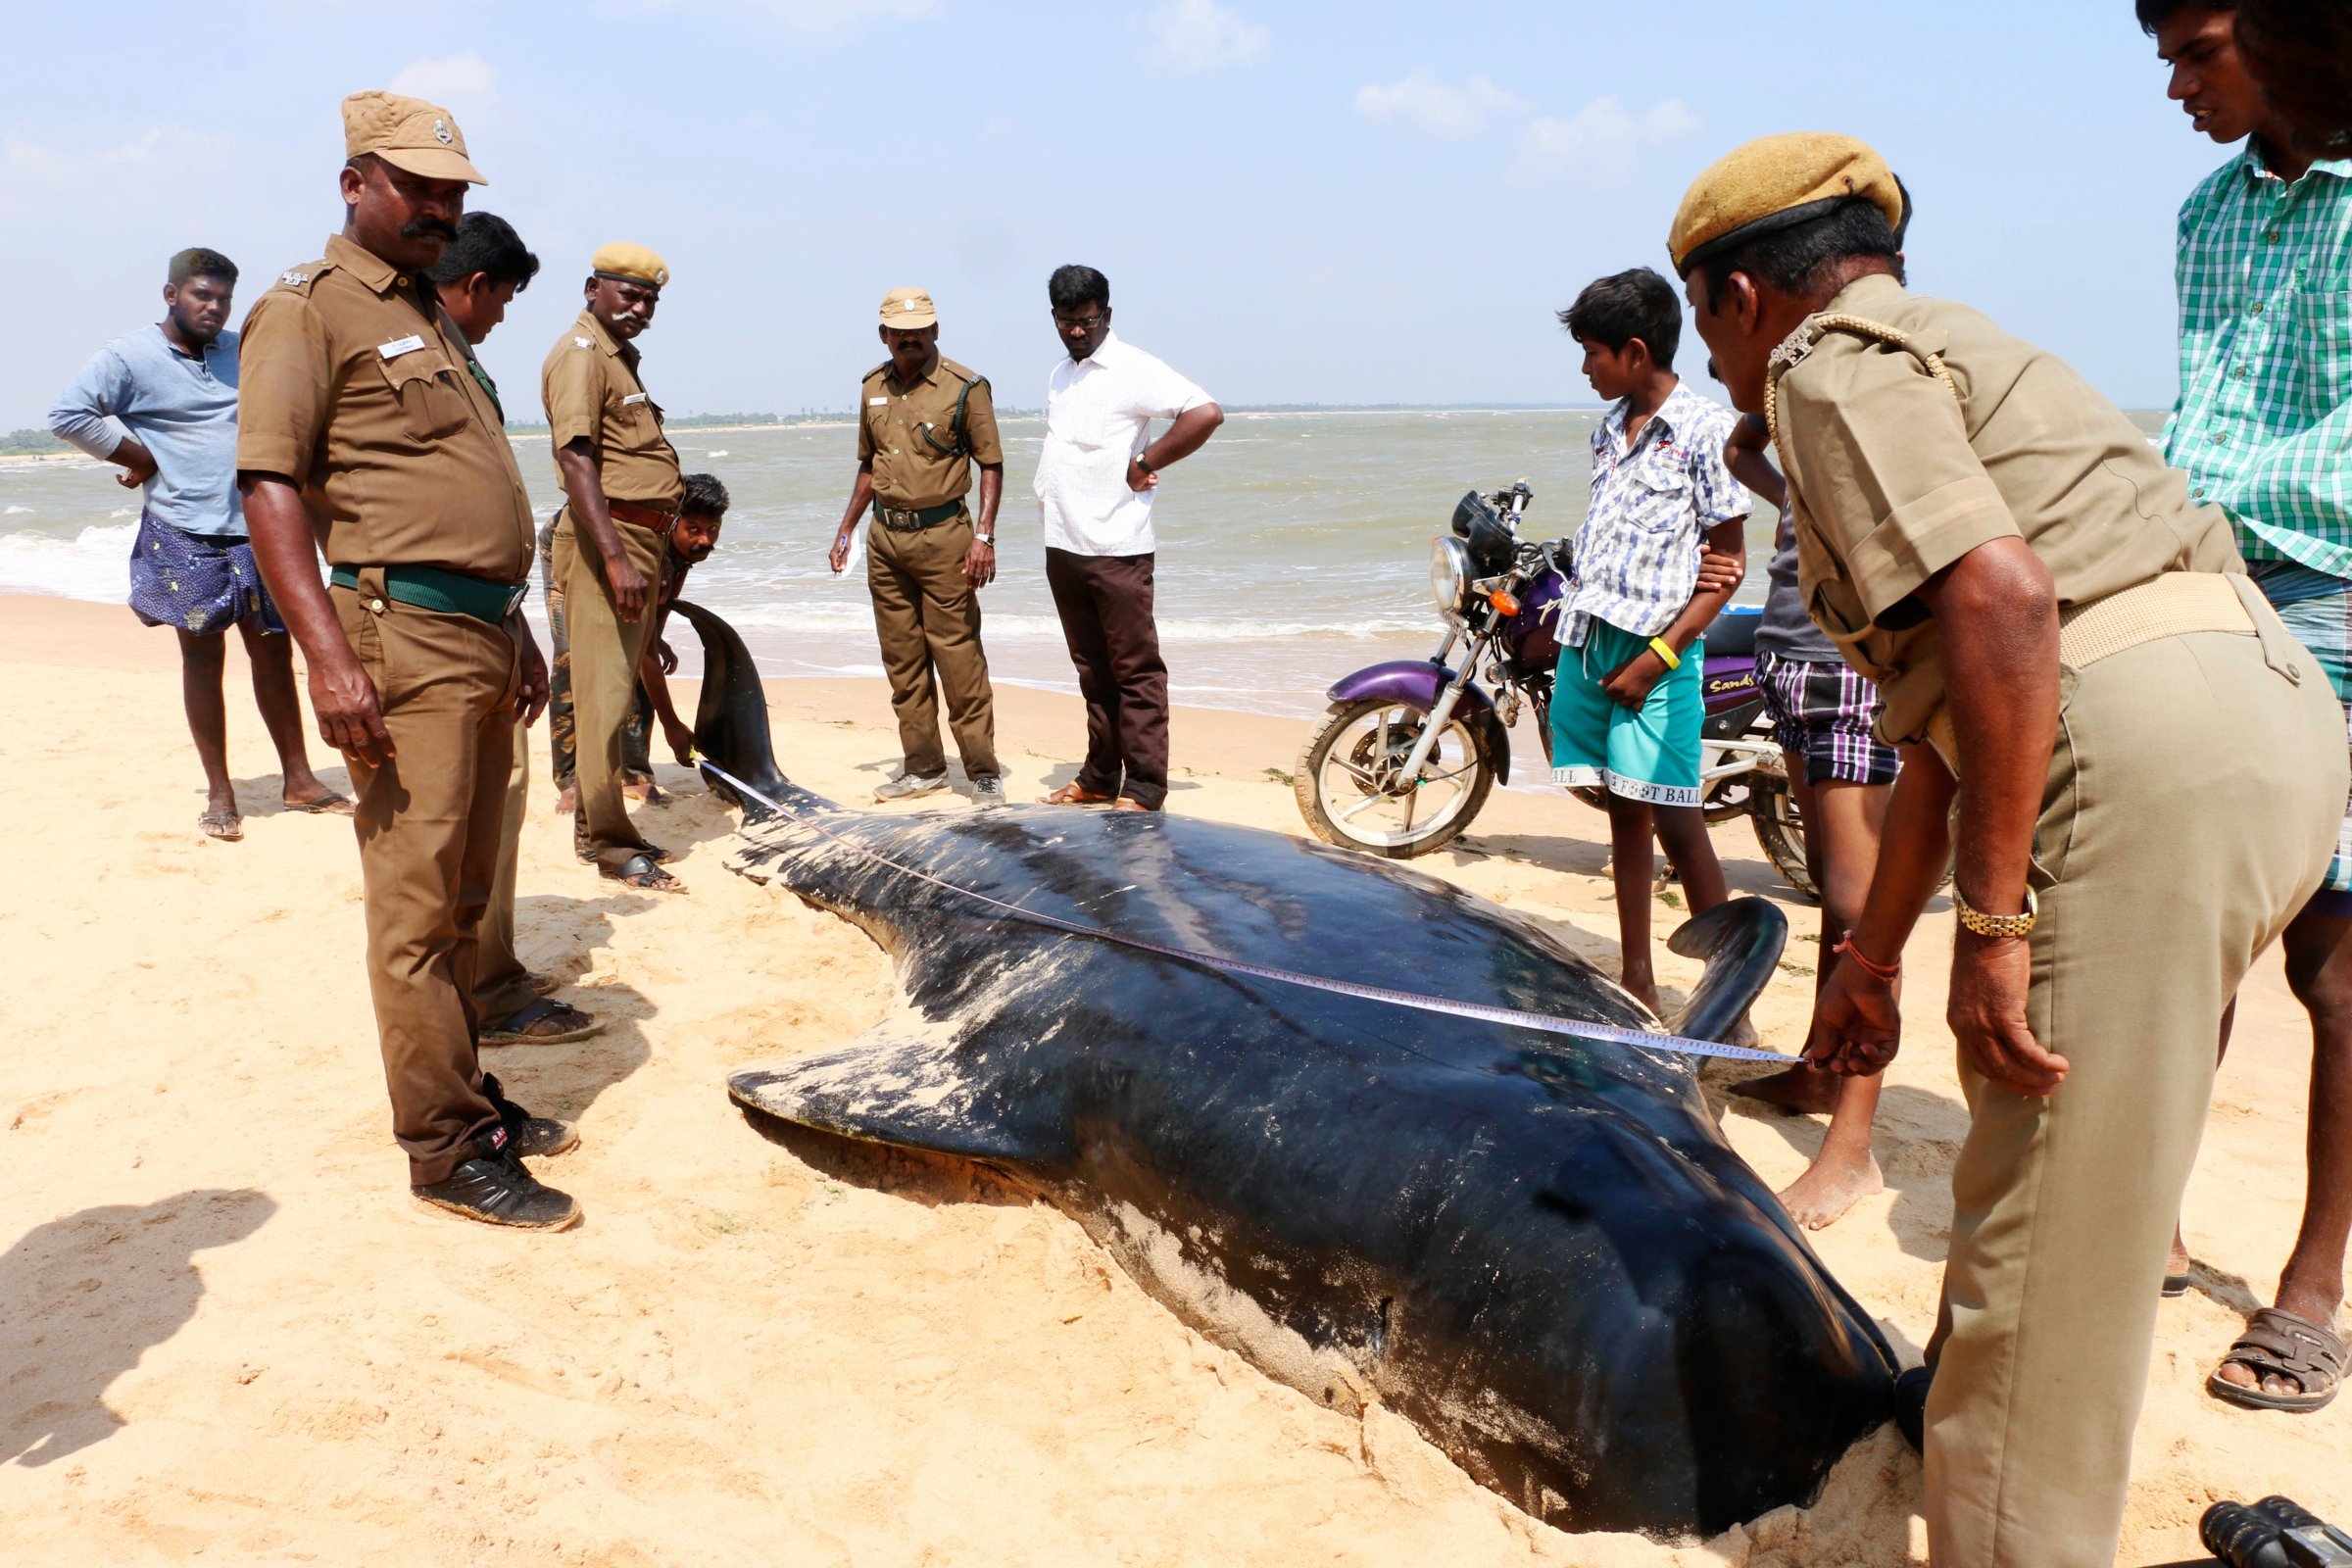 Indian wildlife officials measure one among the dozens of whales that have washed ashore on the Bay of Bengal coast's Manapad beach in Tuticorin district, Tamil Nadu state, India on Tuesday, Jan.12, 2016.